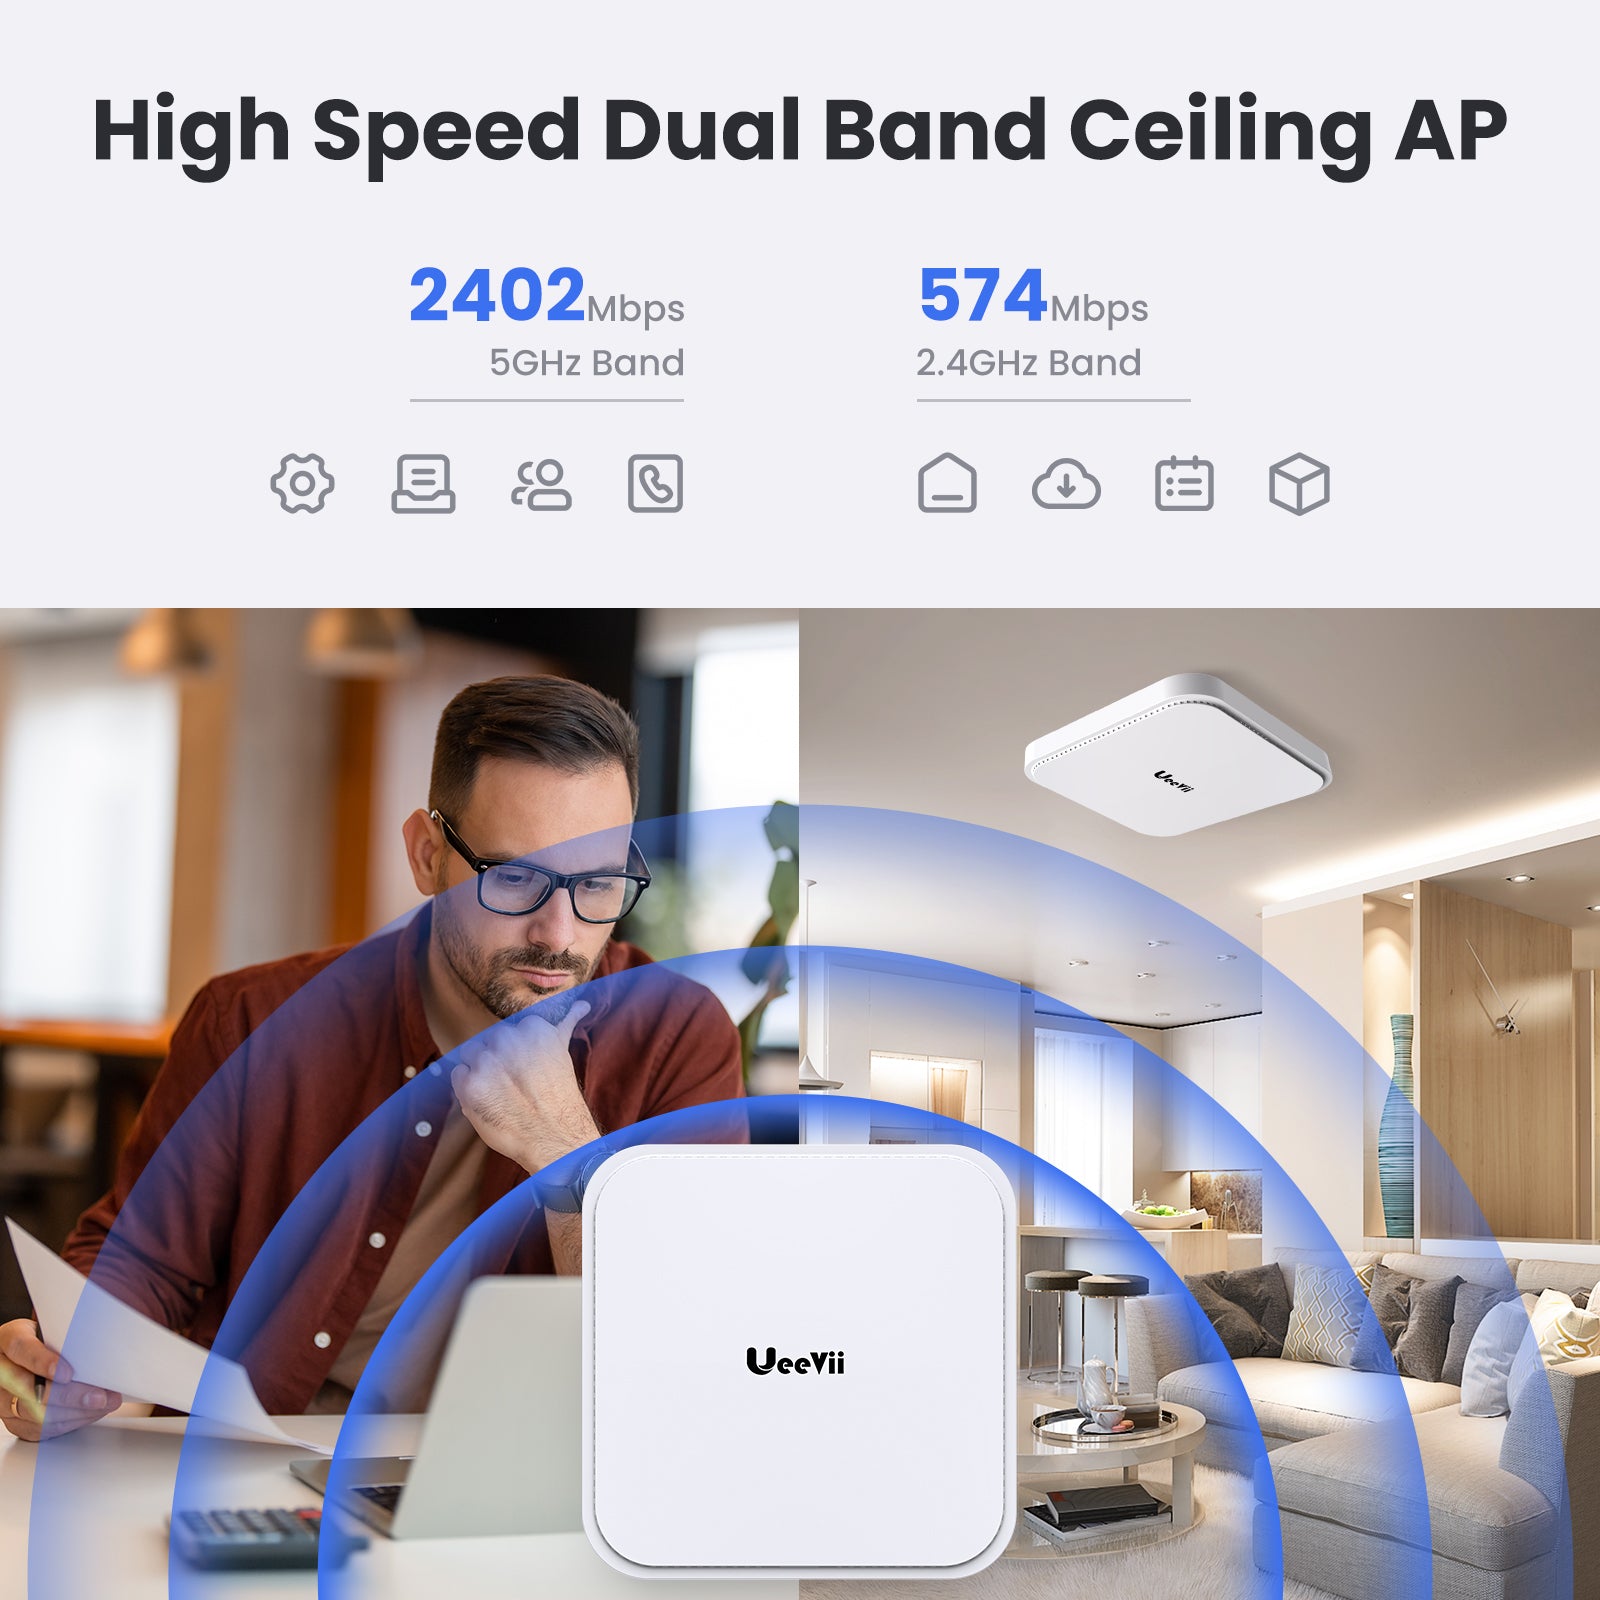 UeeVii UAP66 3000Mbps High-Speed Access Point Wireless Ceiling AP